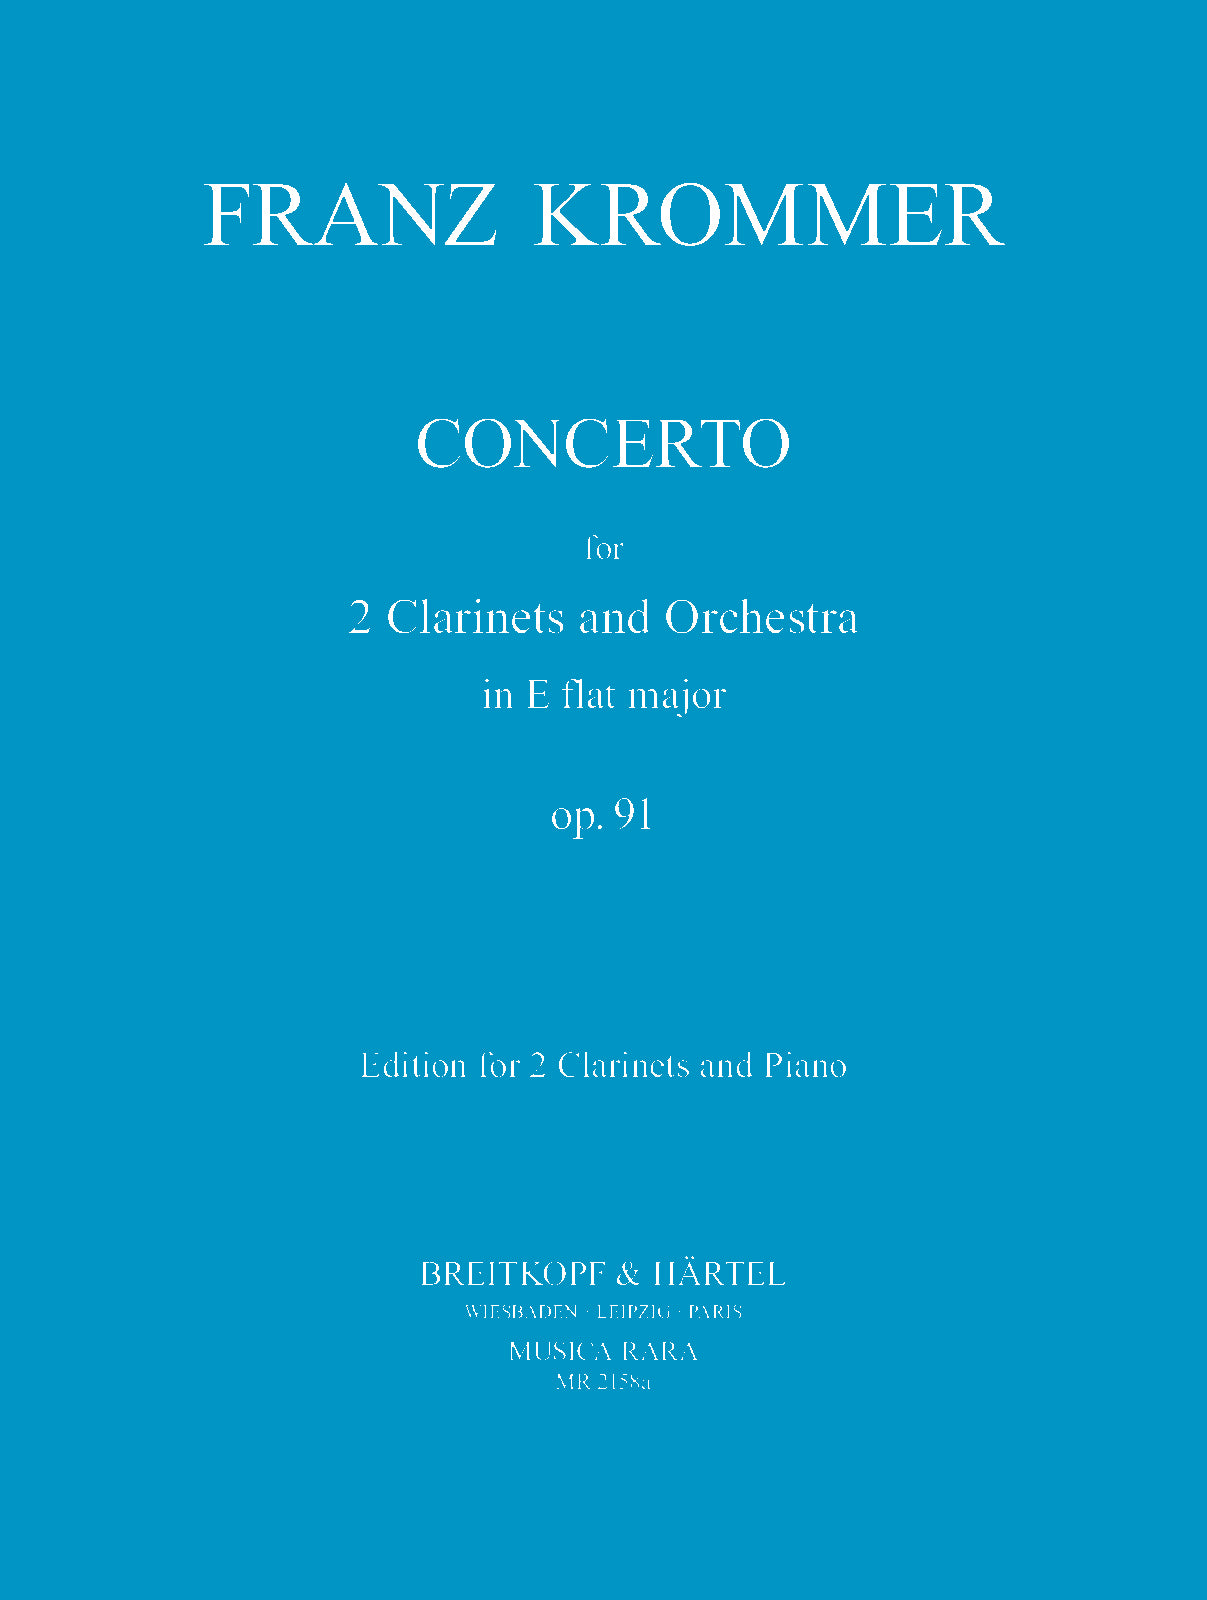 Krommer: Concerto for 2 Clarinets in E-flat Major, Op. 91